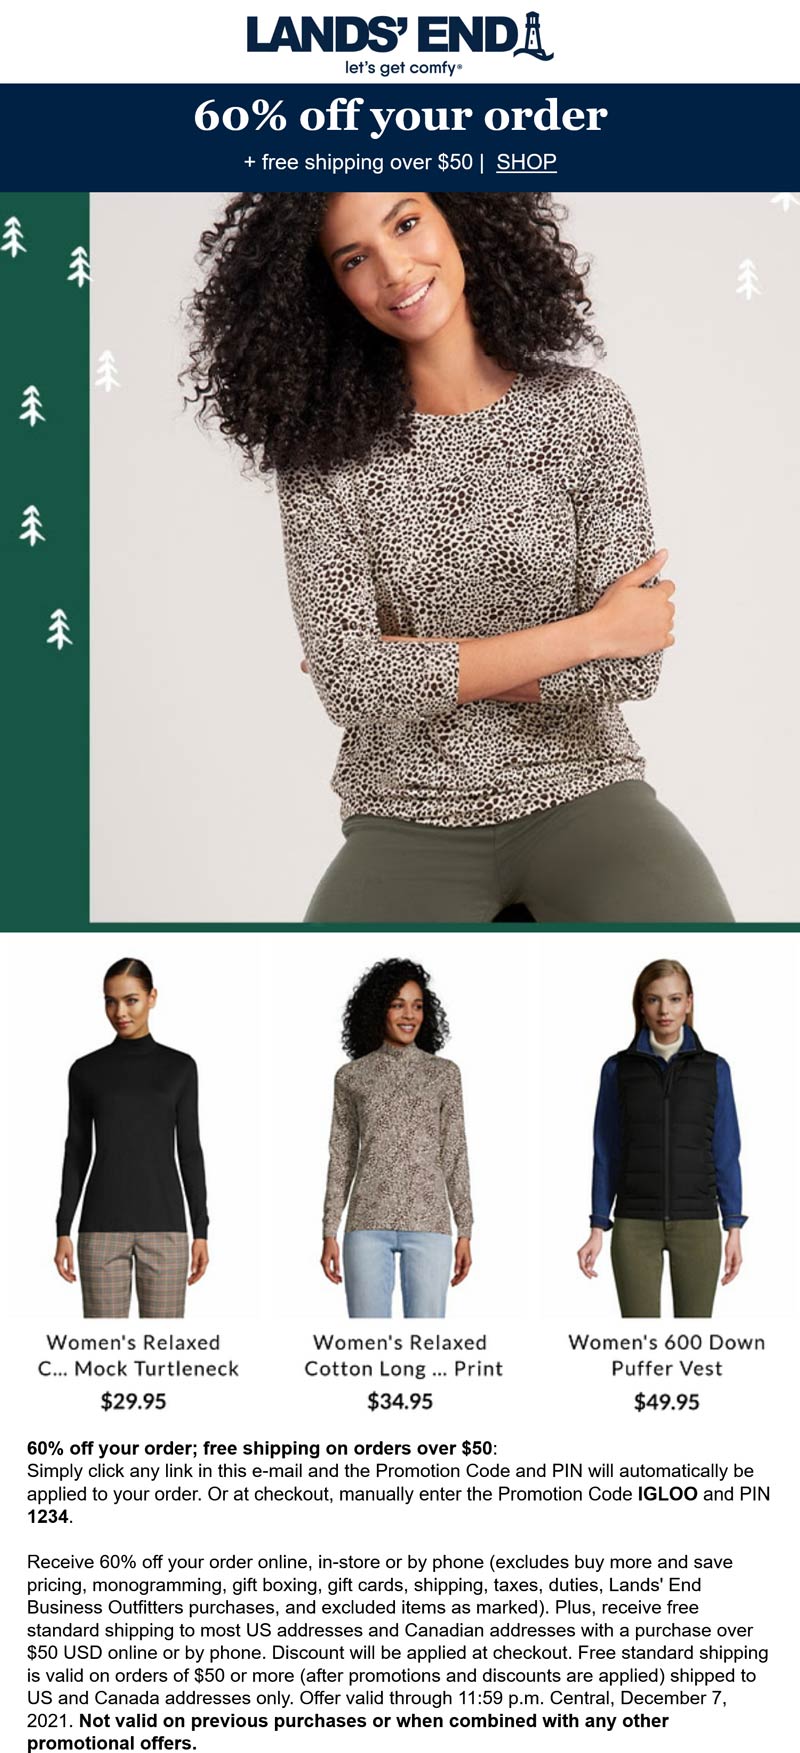 Lands End stores Coupon  60% off at Lands End via promo code IGLOO and pin 1234 #landsend 